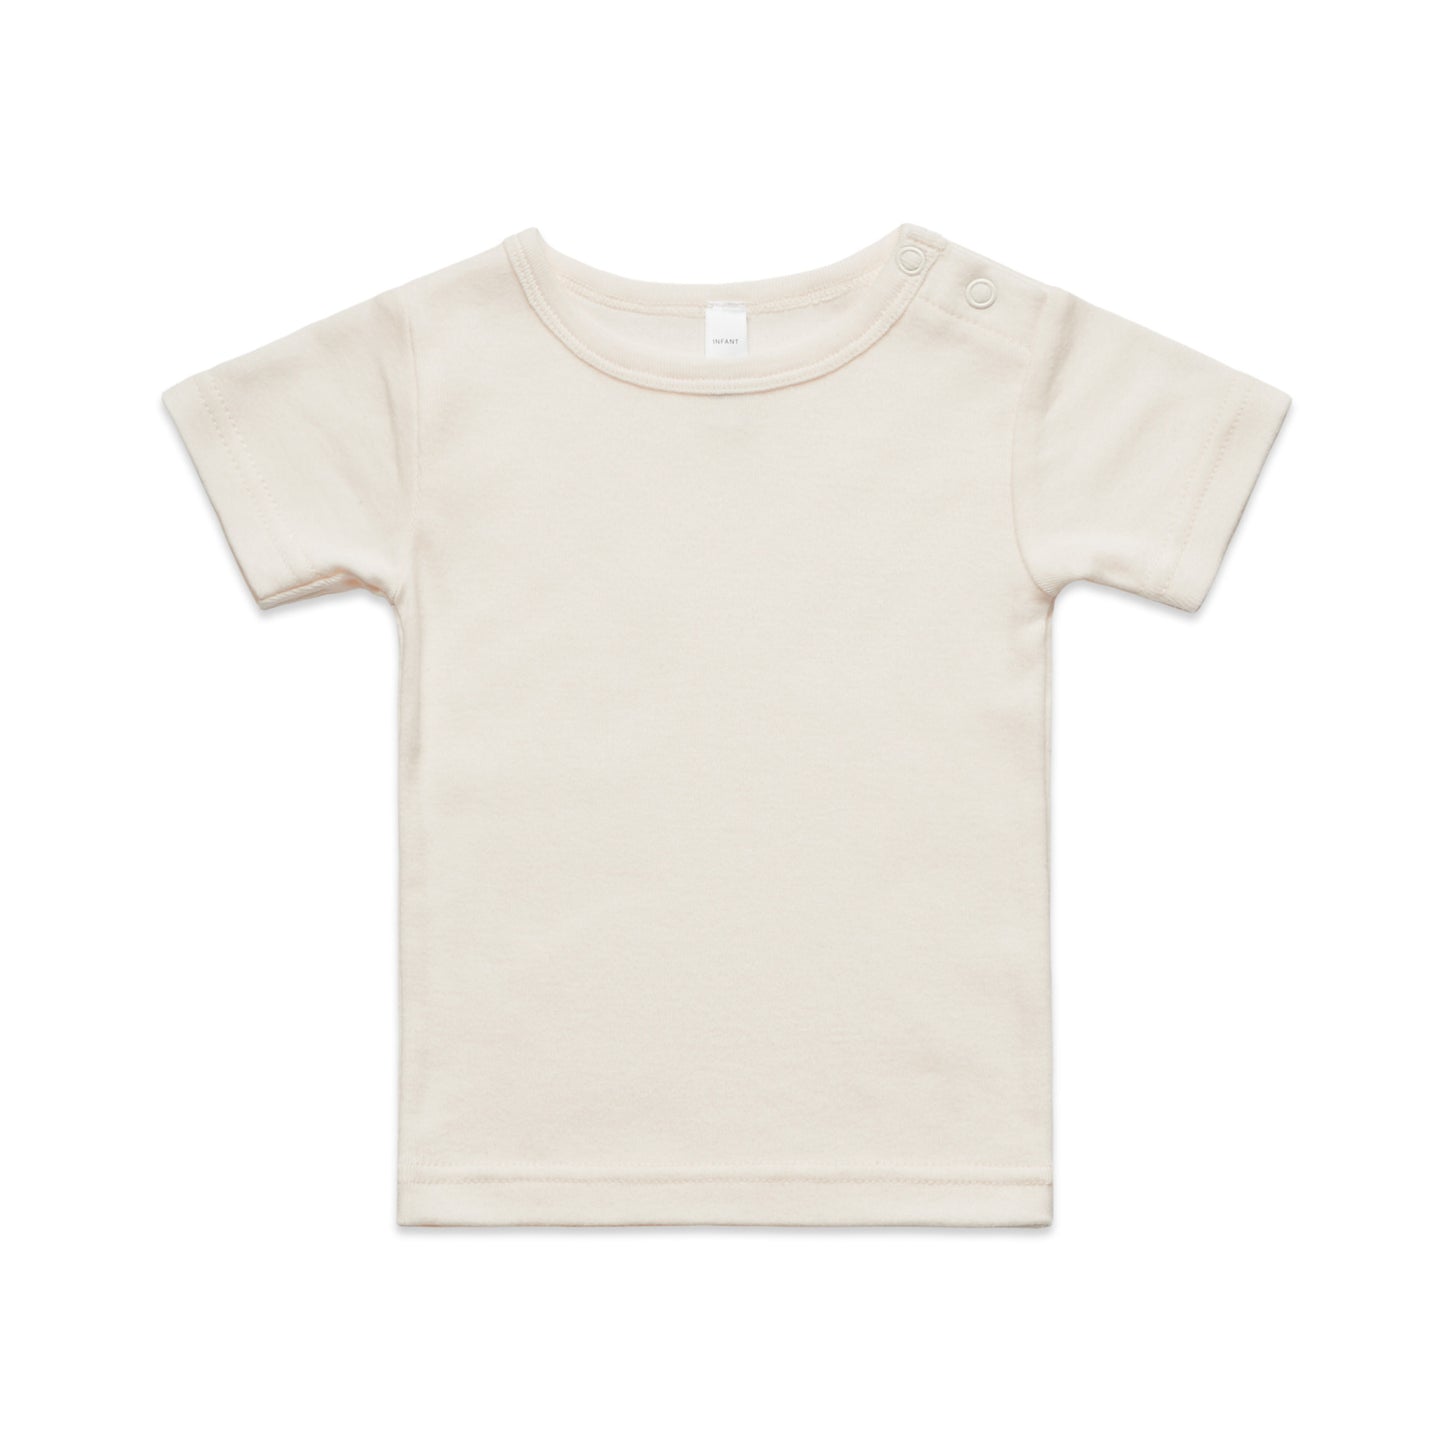 AS Colour Infant Wee Tee - 3001